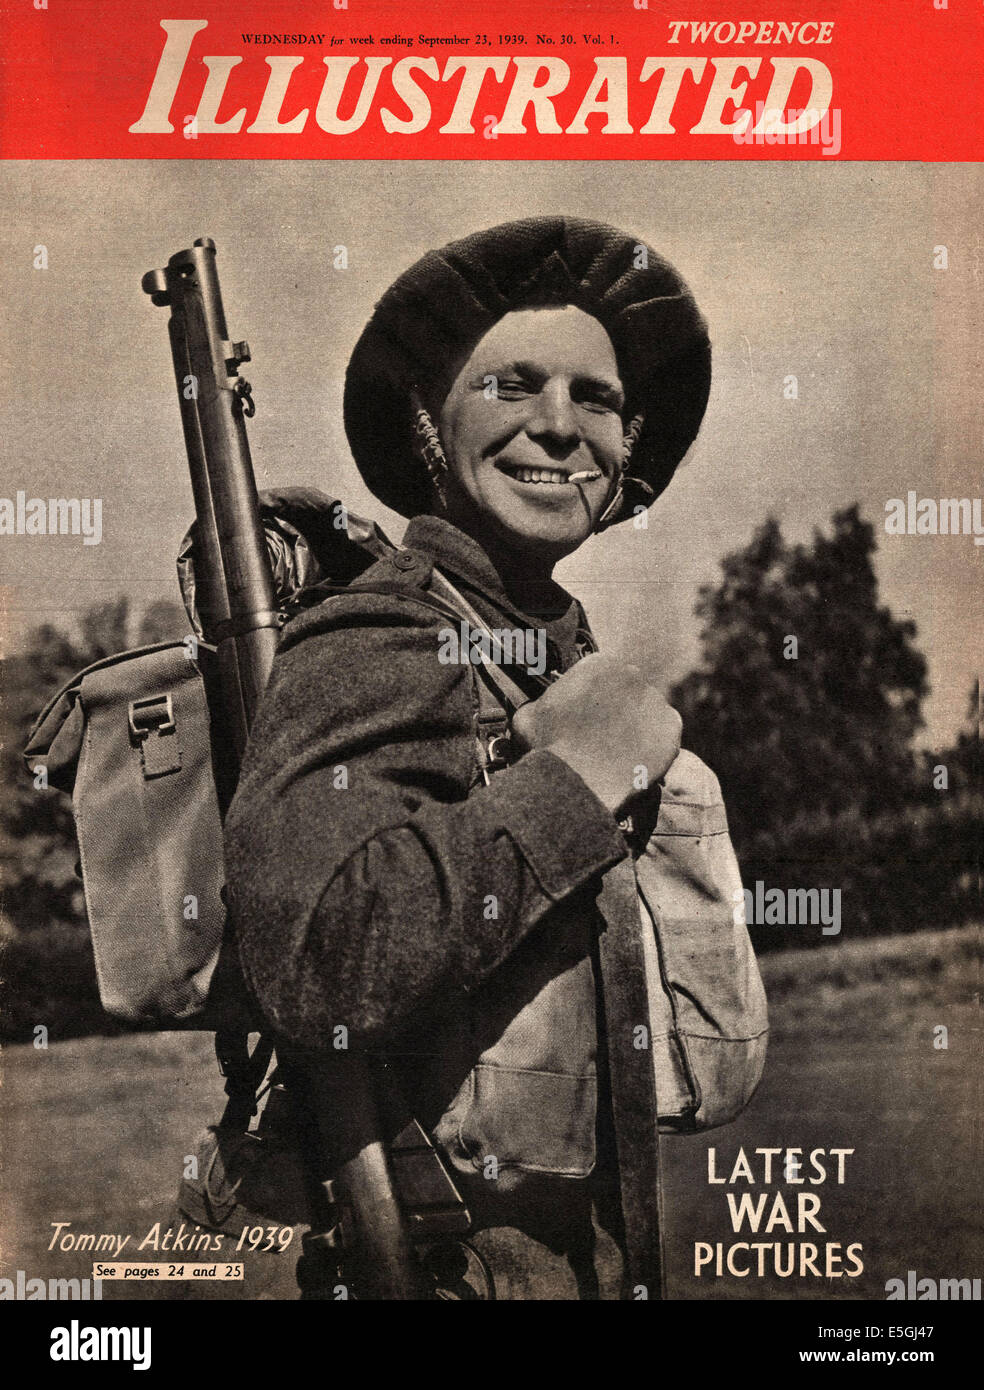 1939 Illustrated magazine front cover showing photograph of a smiling British soldier entitled 'Tommy Atkins 1939' Stock Photo